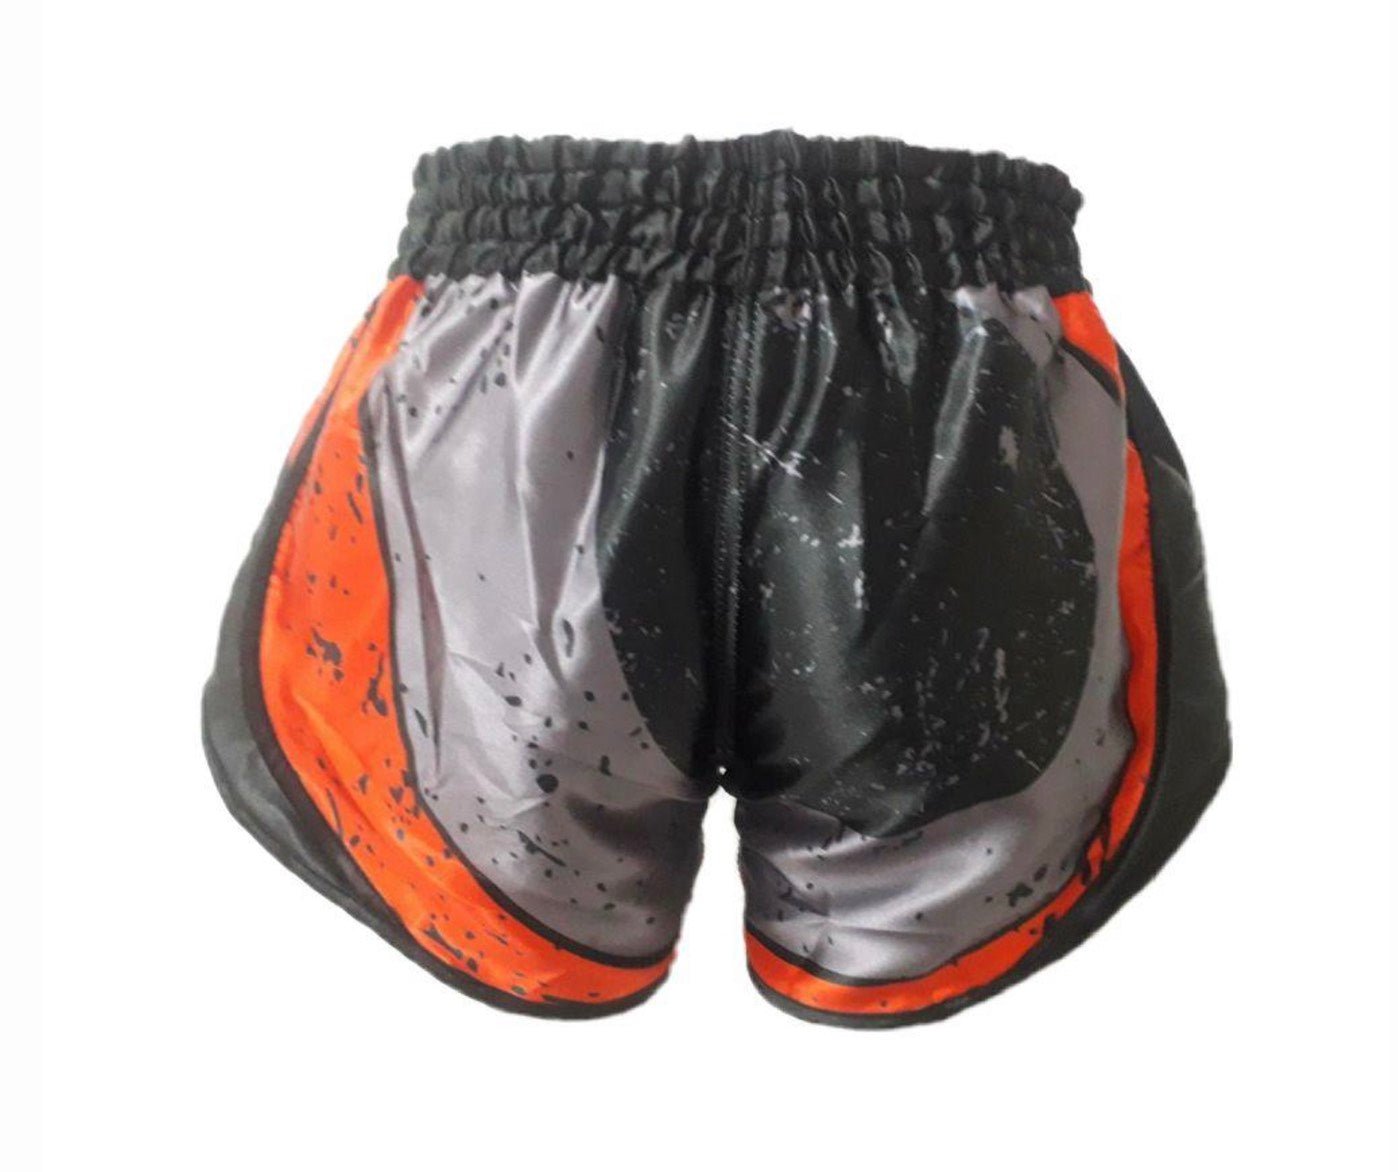 Booster Shorts BSH11 Booster